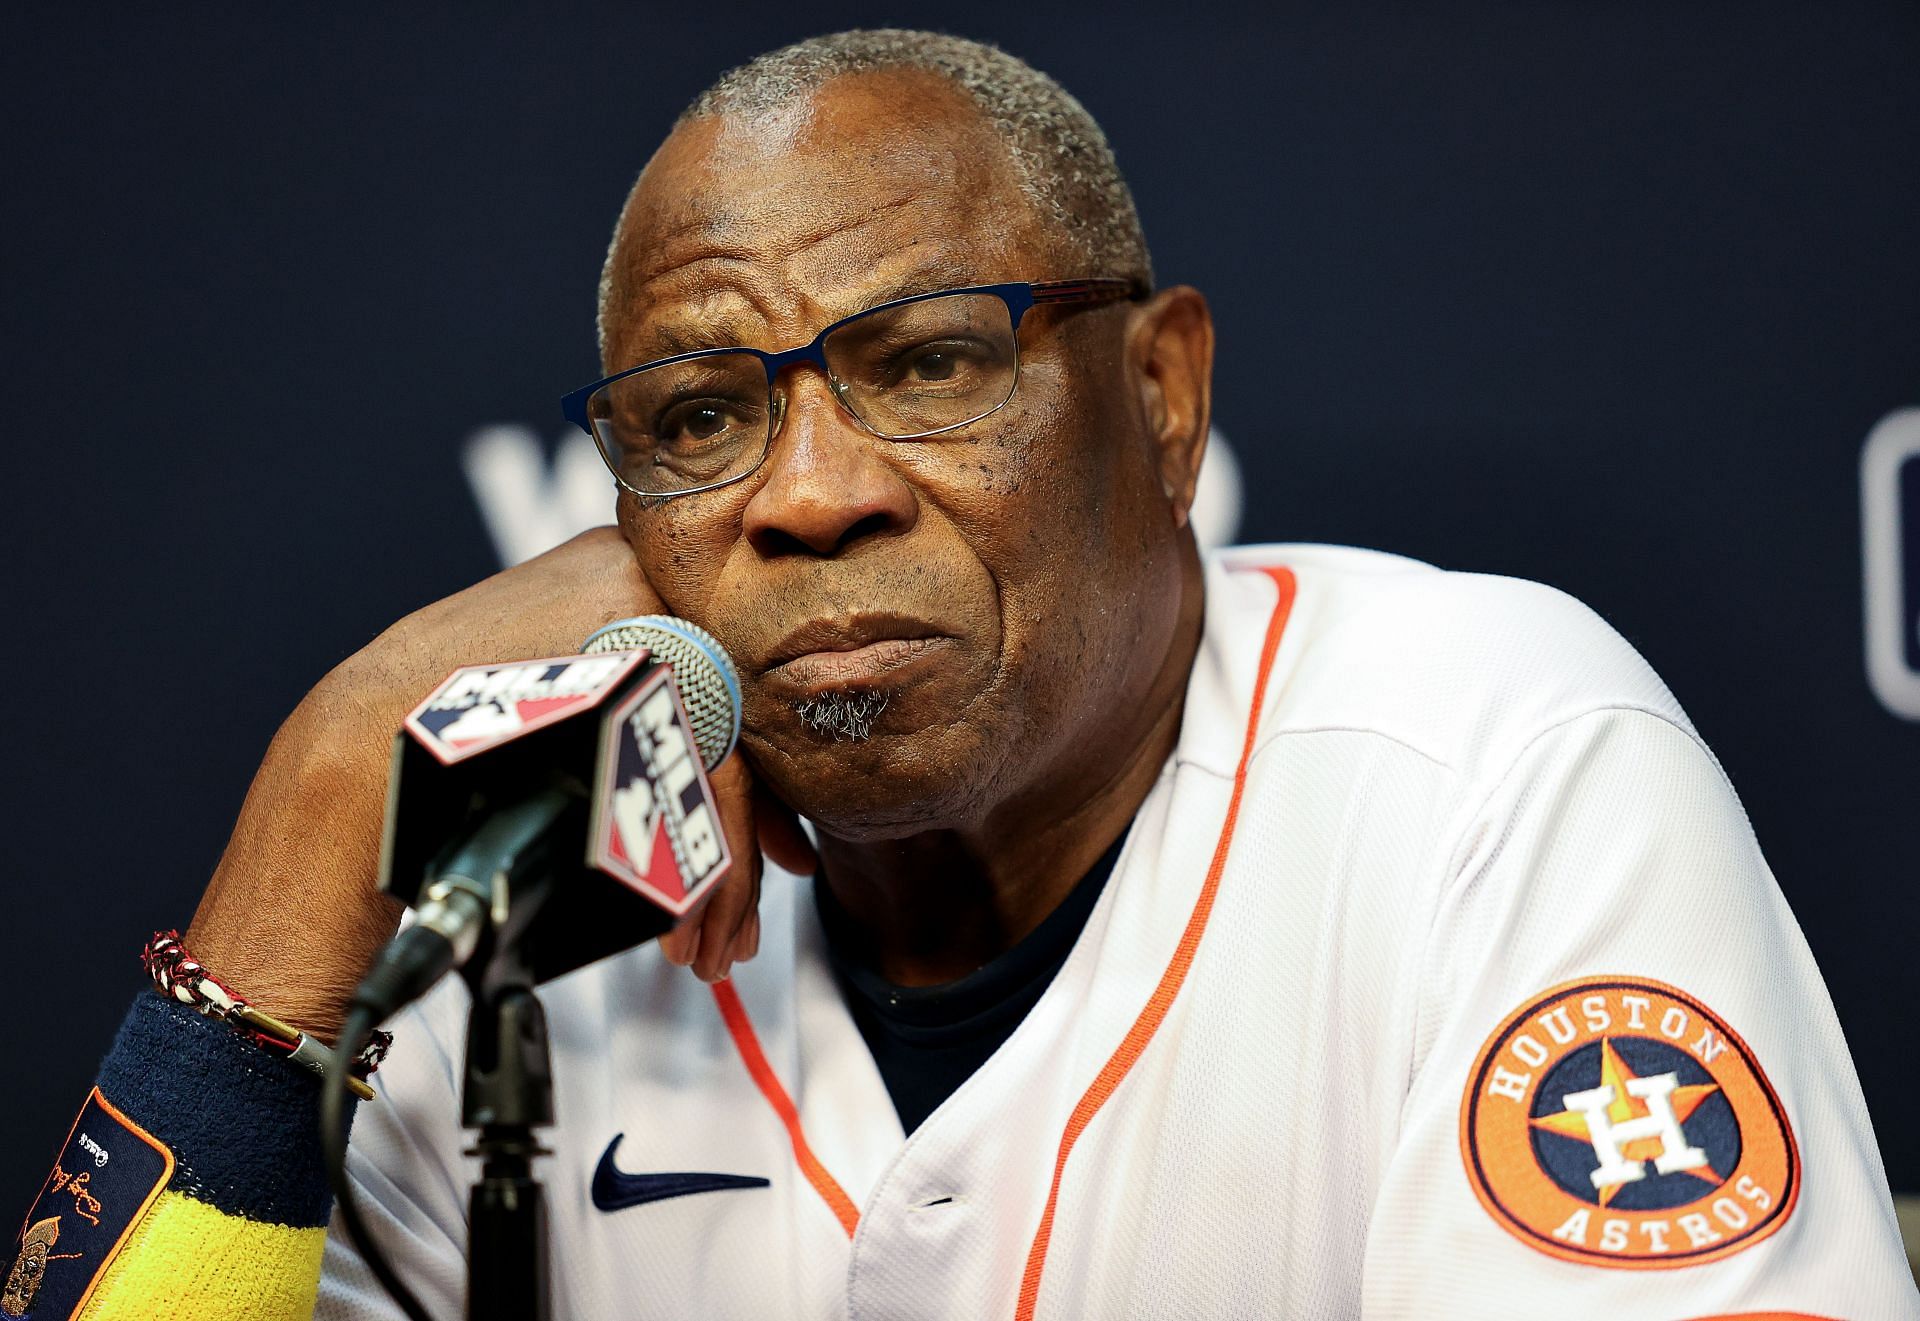 What a joy to meet Dusty Baker, head coach of the Houston Astros